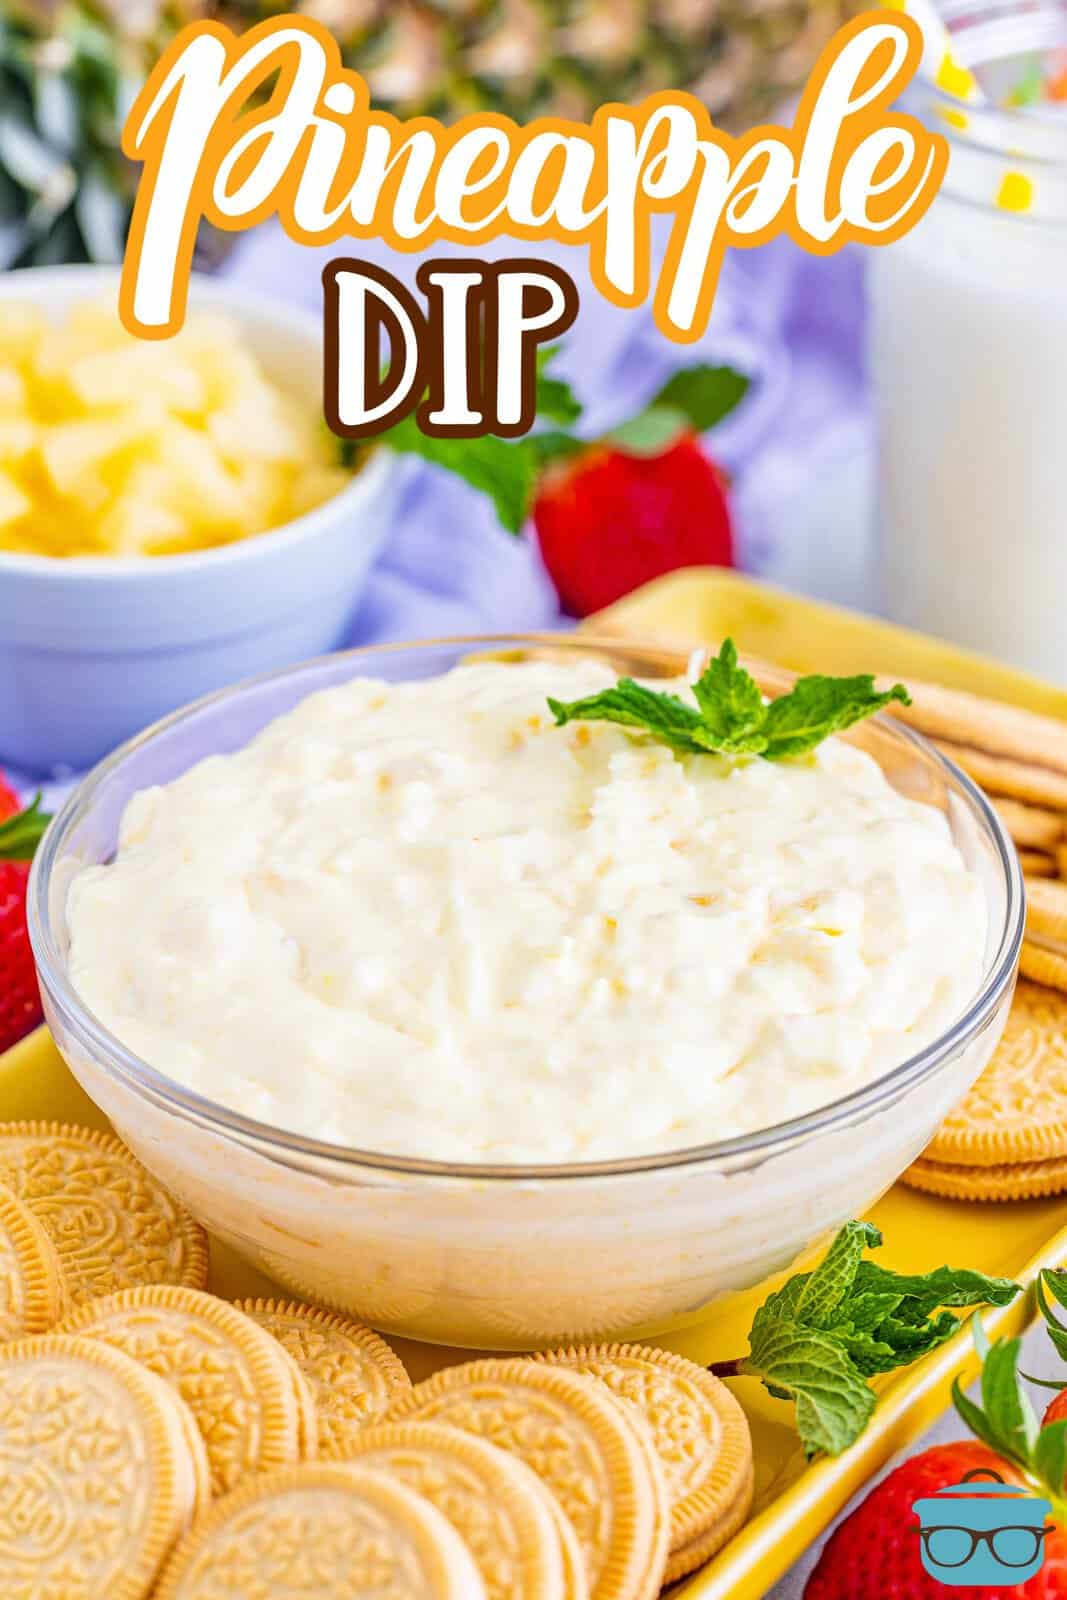 A small bowl of pineapple dip with cookies in front.